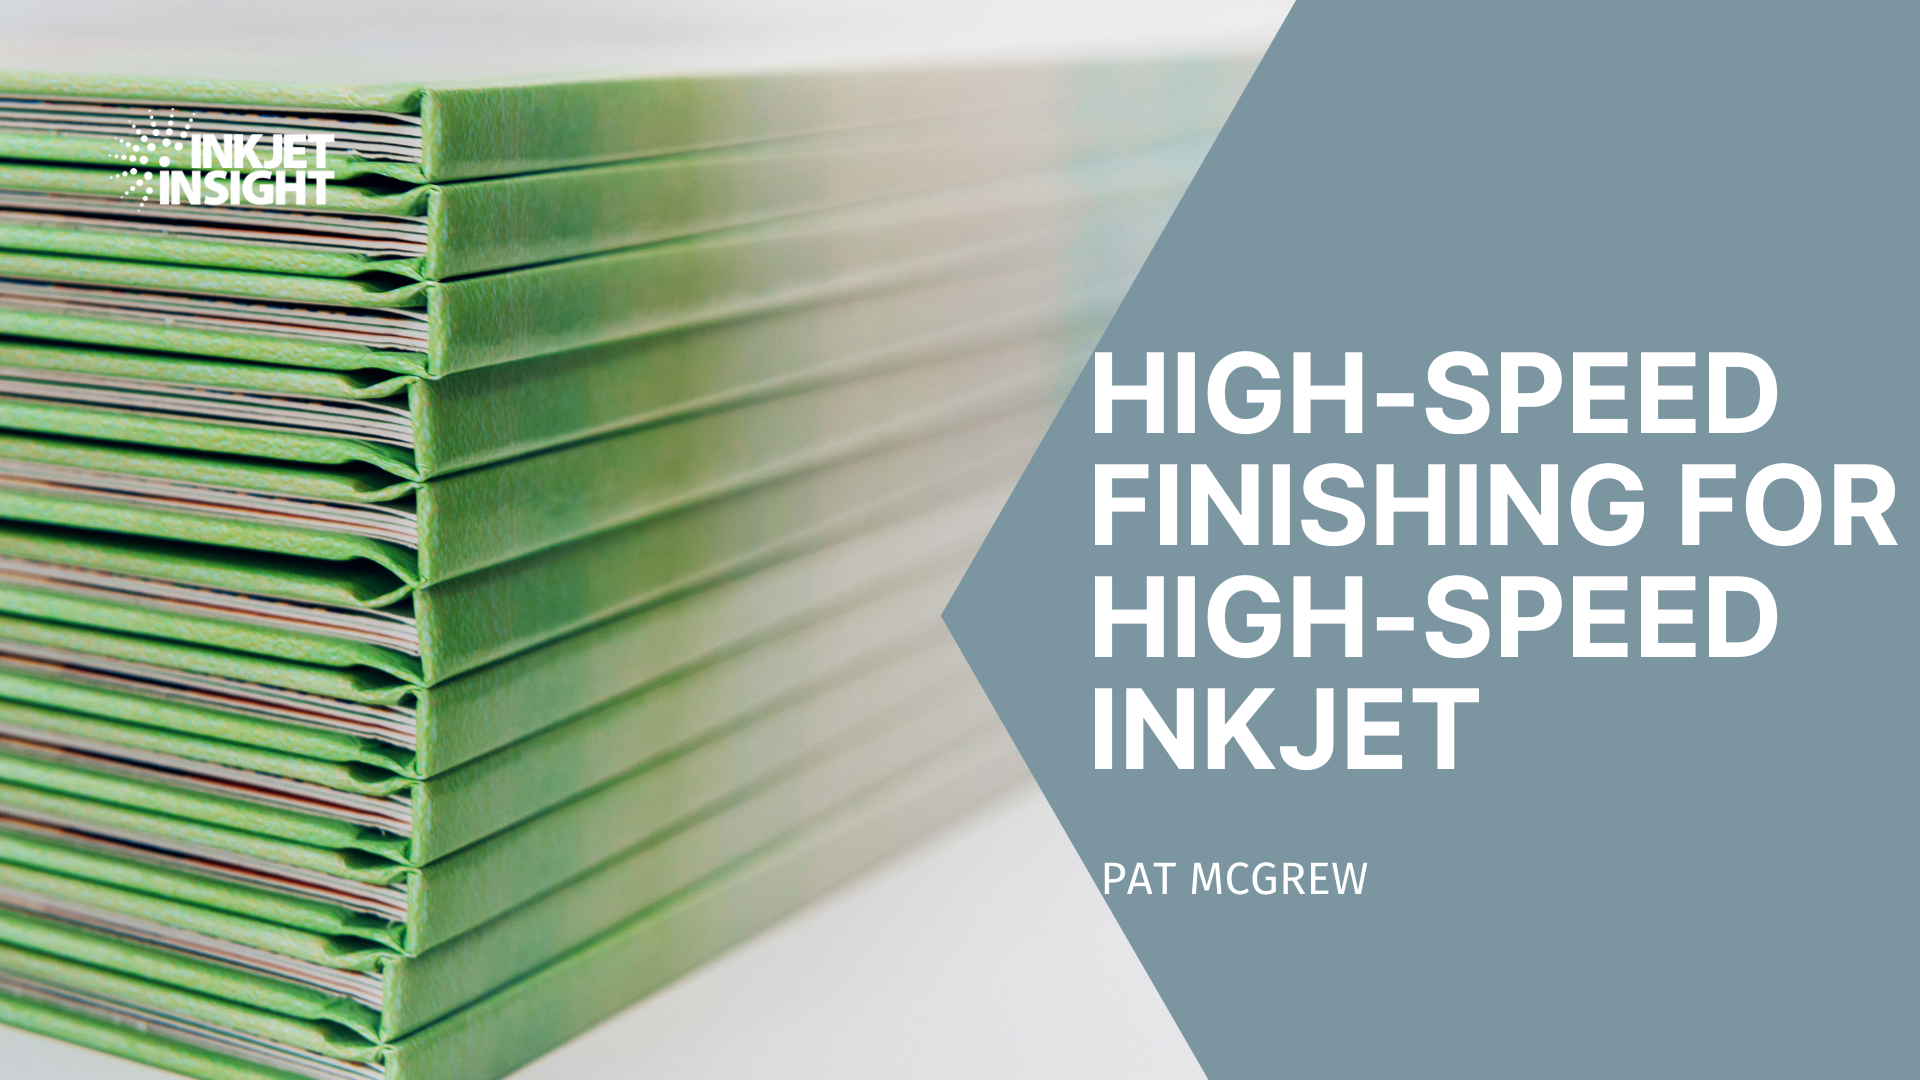 Featured image for “High-Speed Finishing for High-Speed Inkjet”